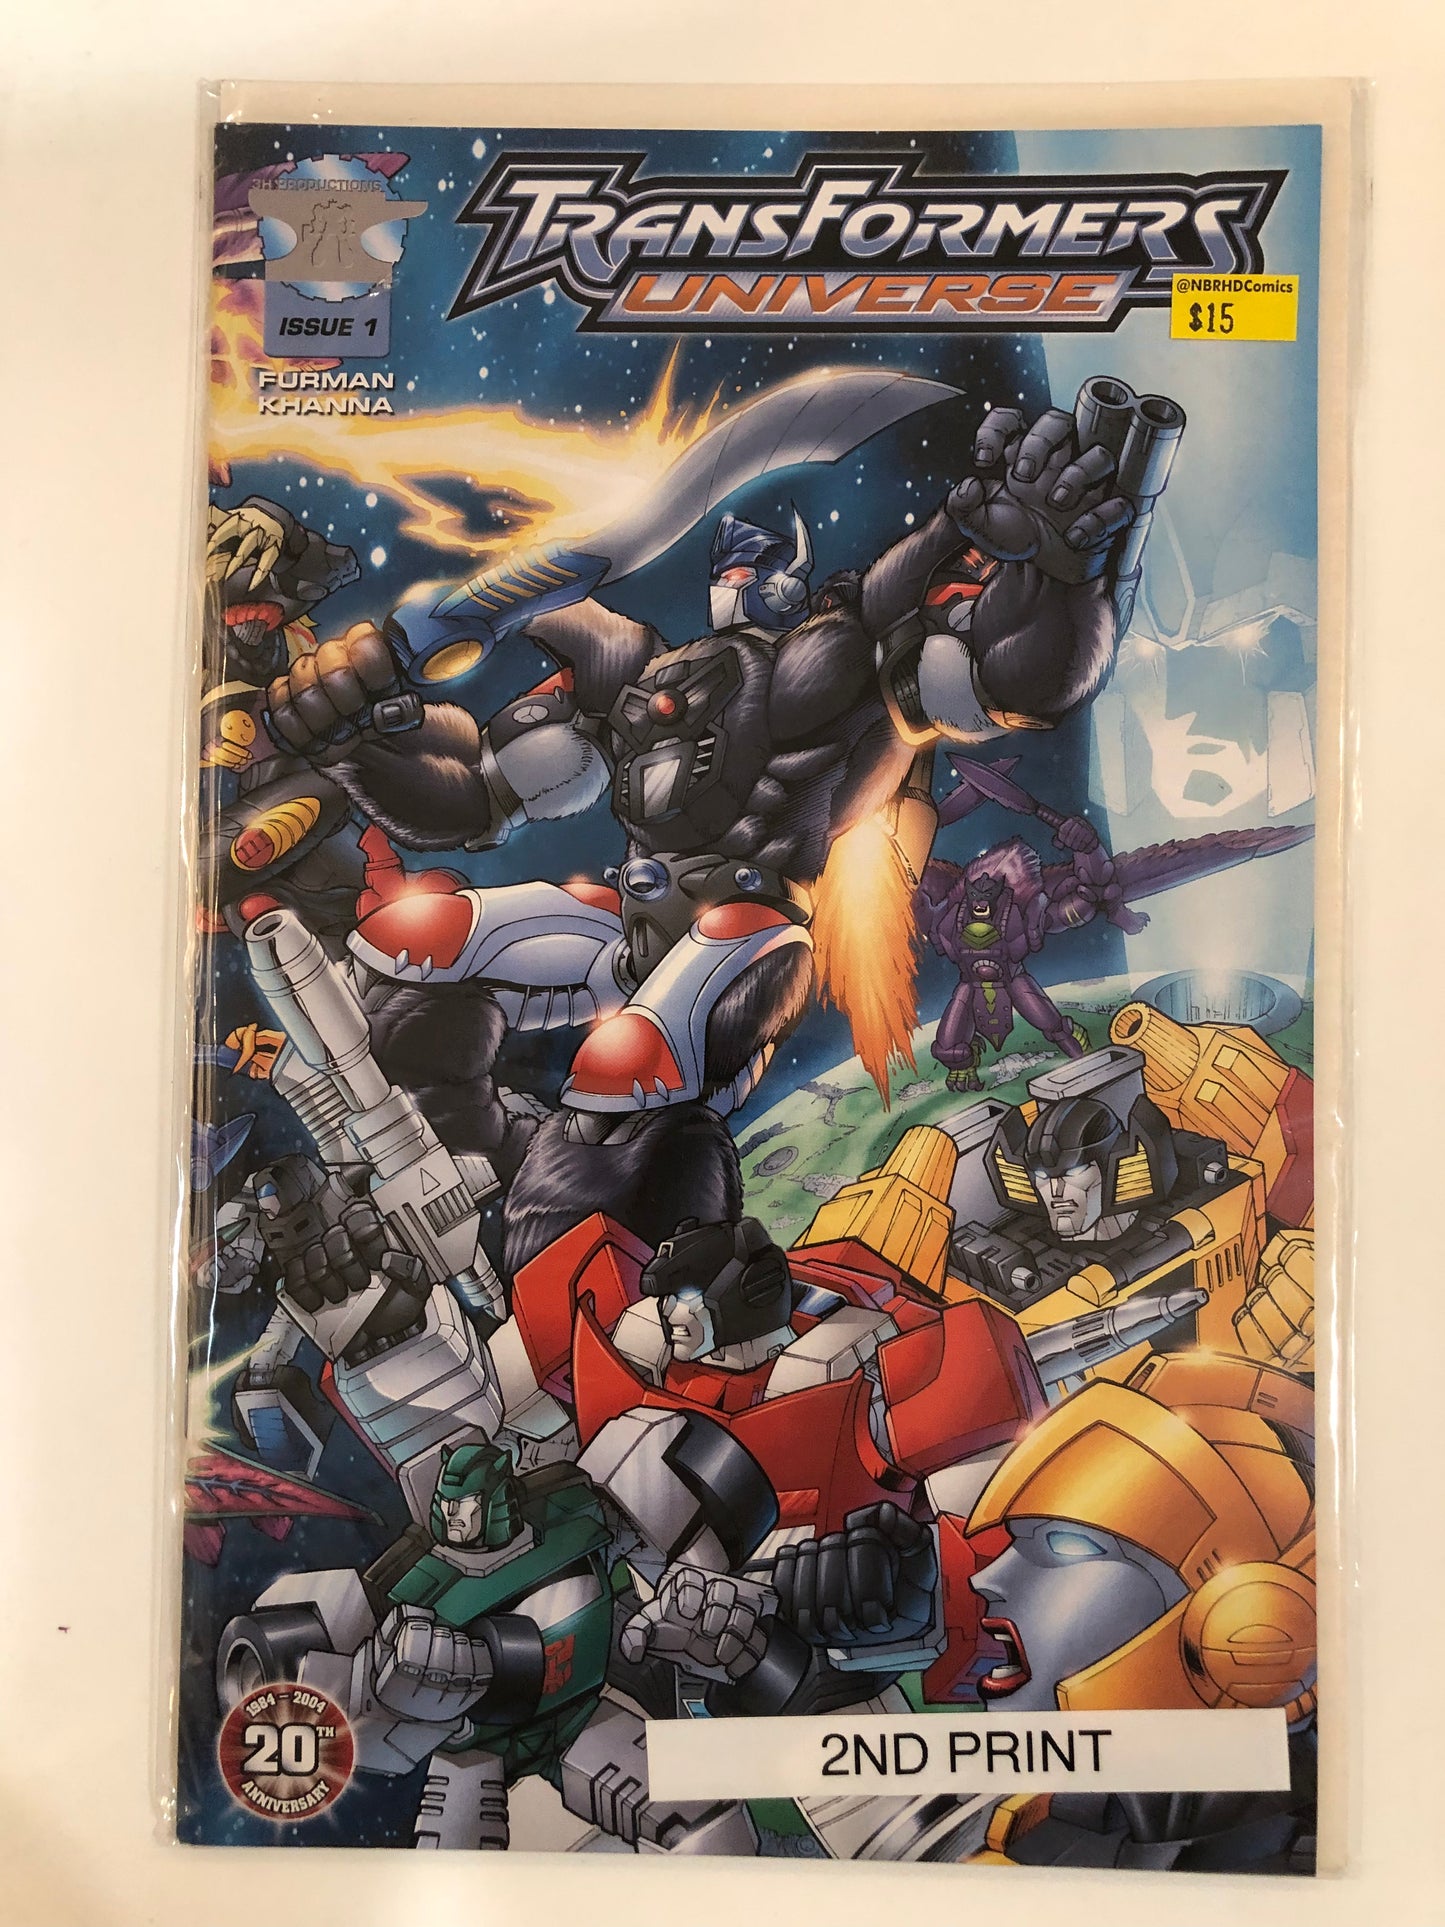 Transformers Universe #1 (Second Printing)